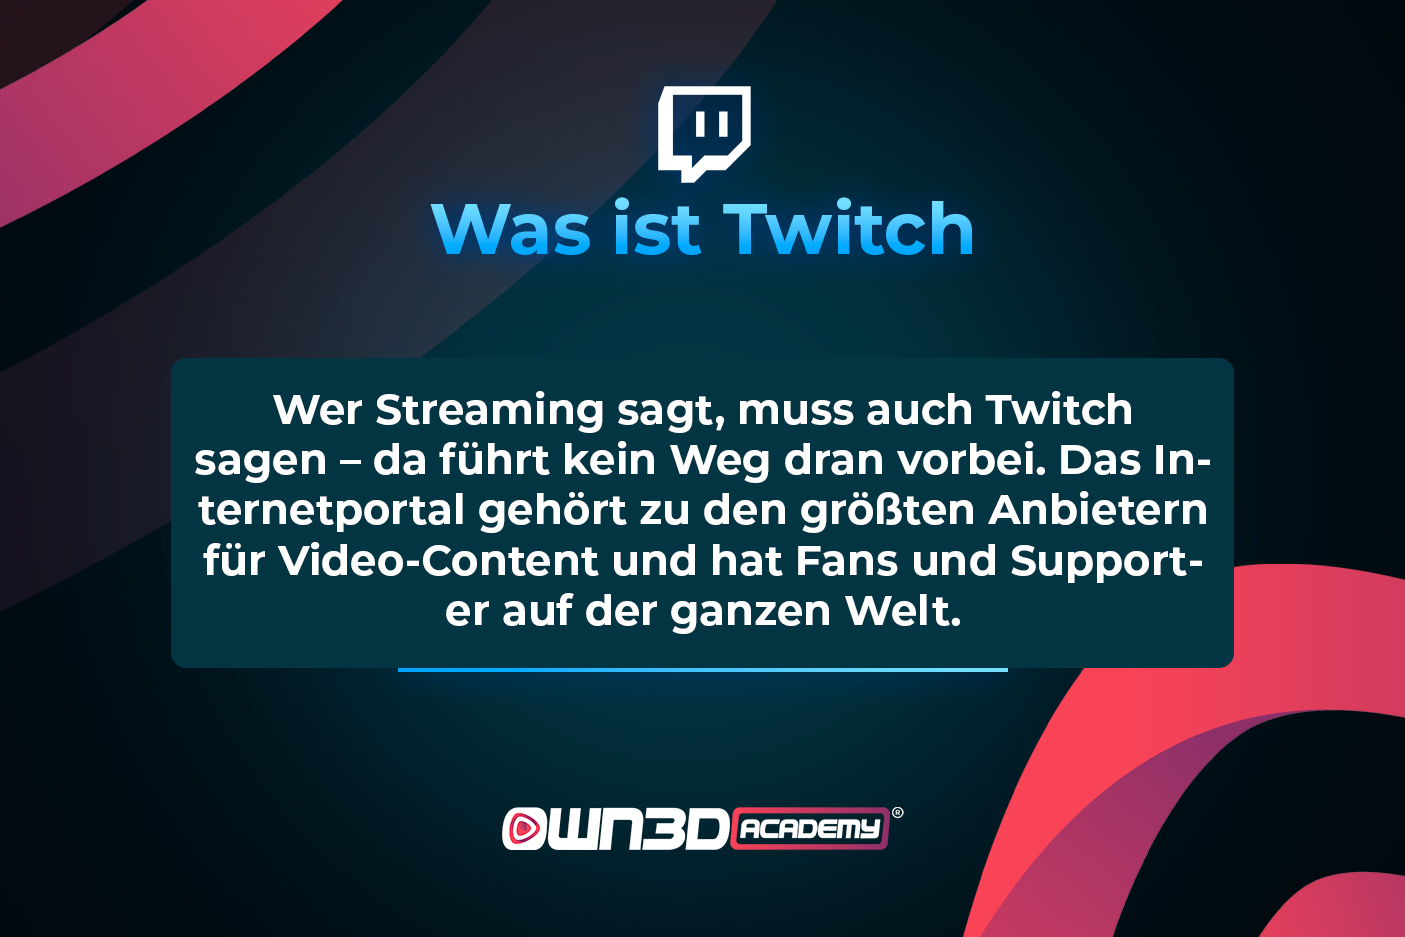 TWITCH_History-and-Keyfacts_GER_what-is-twitch.jpg